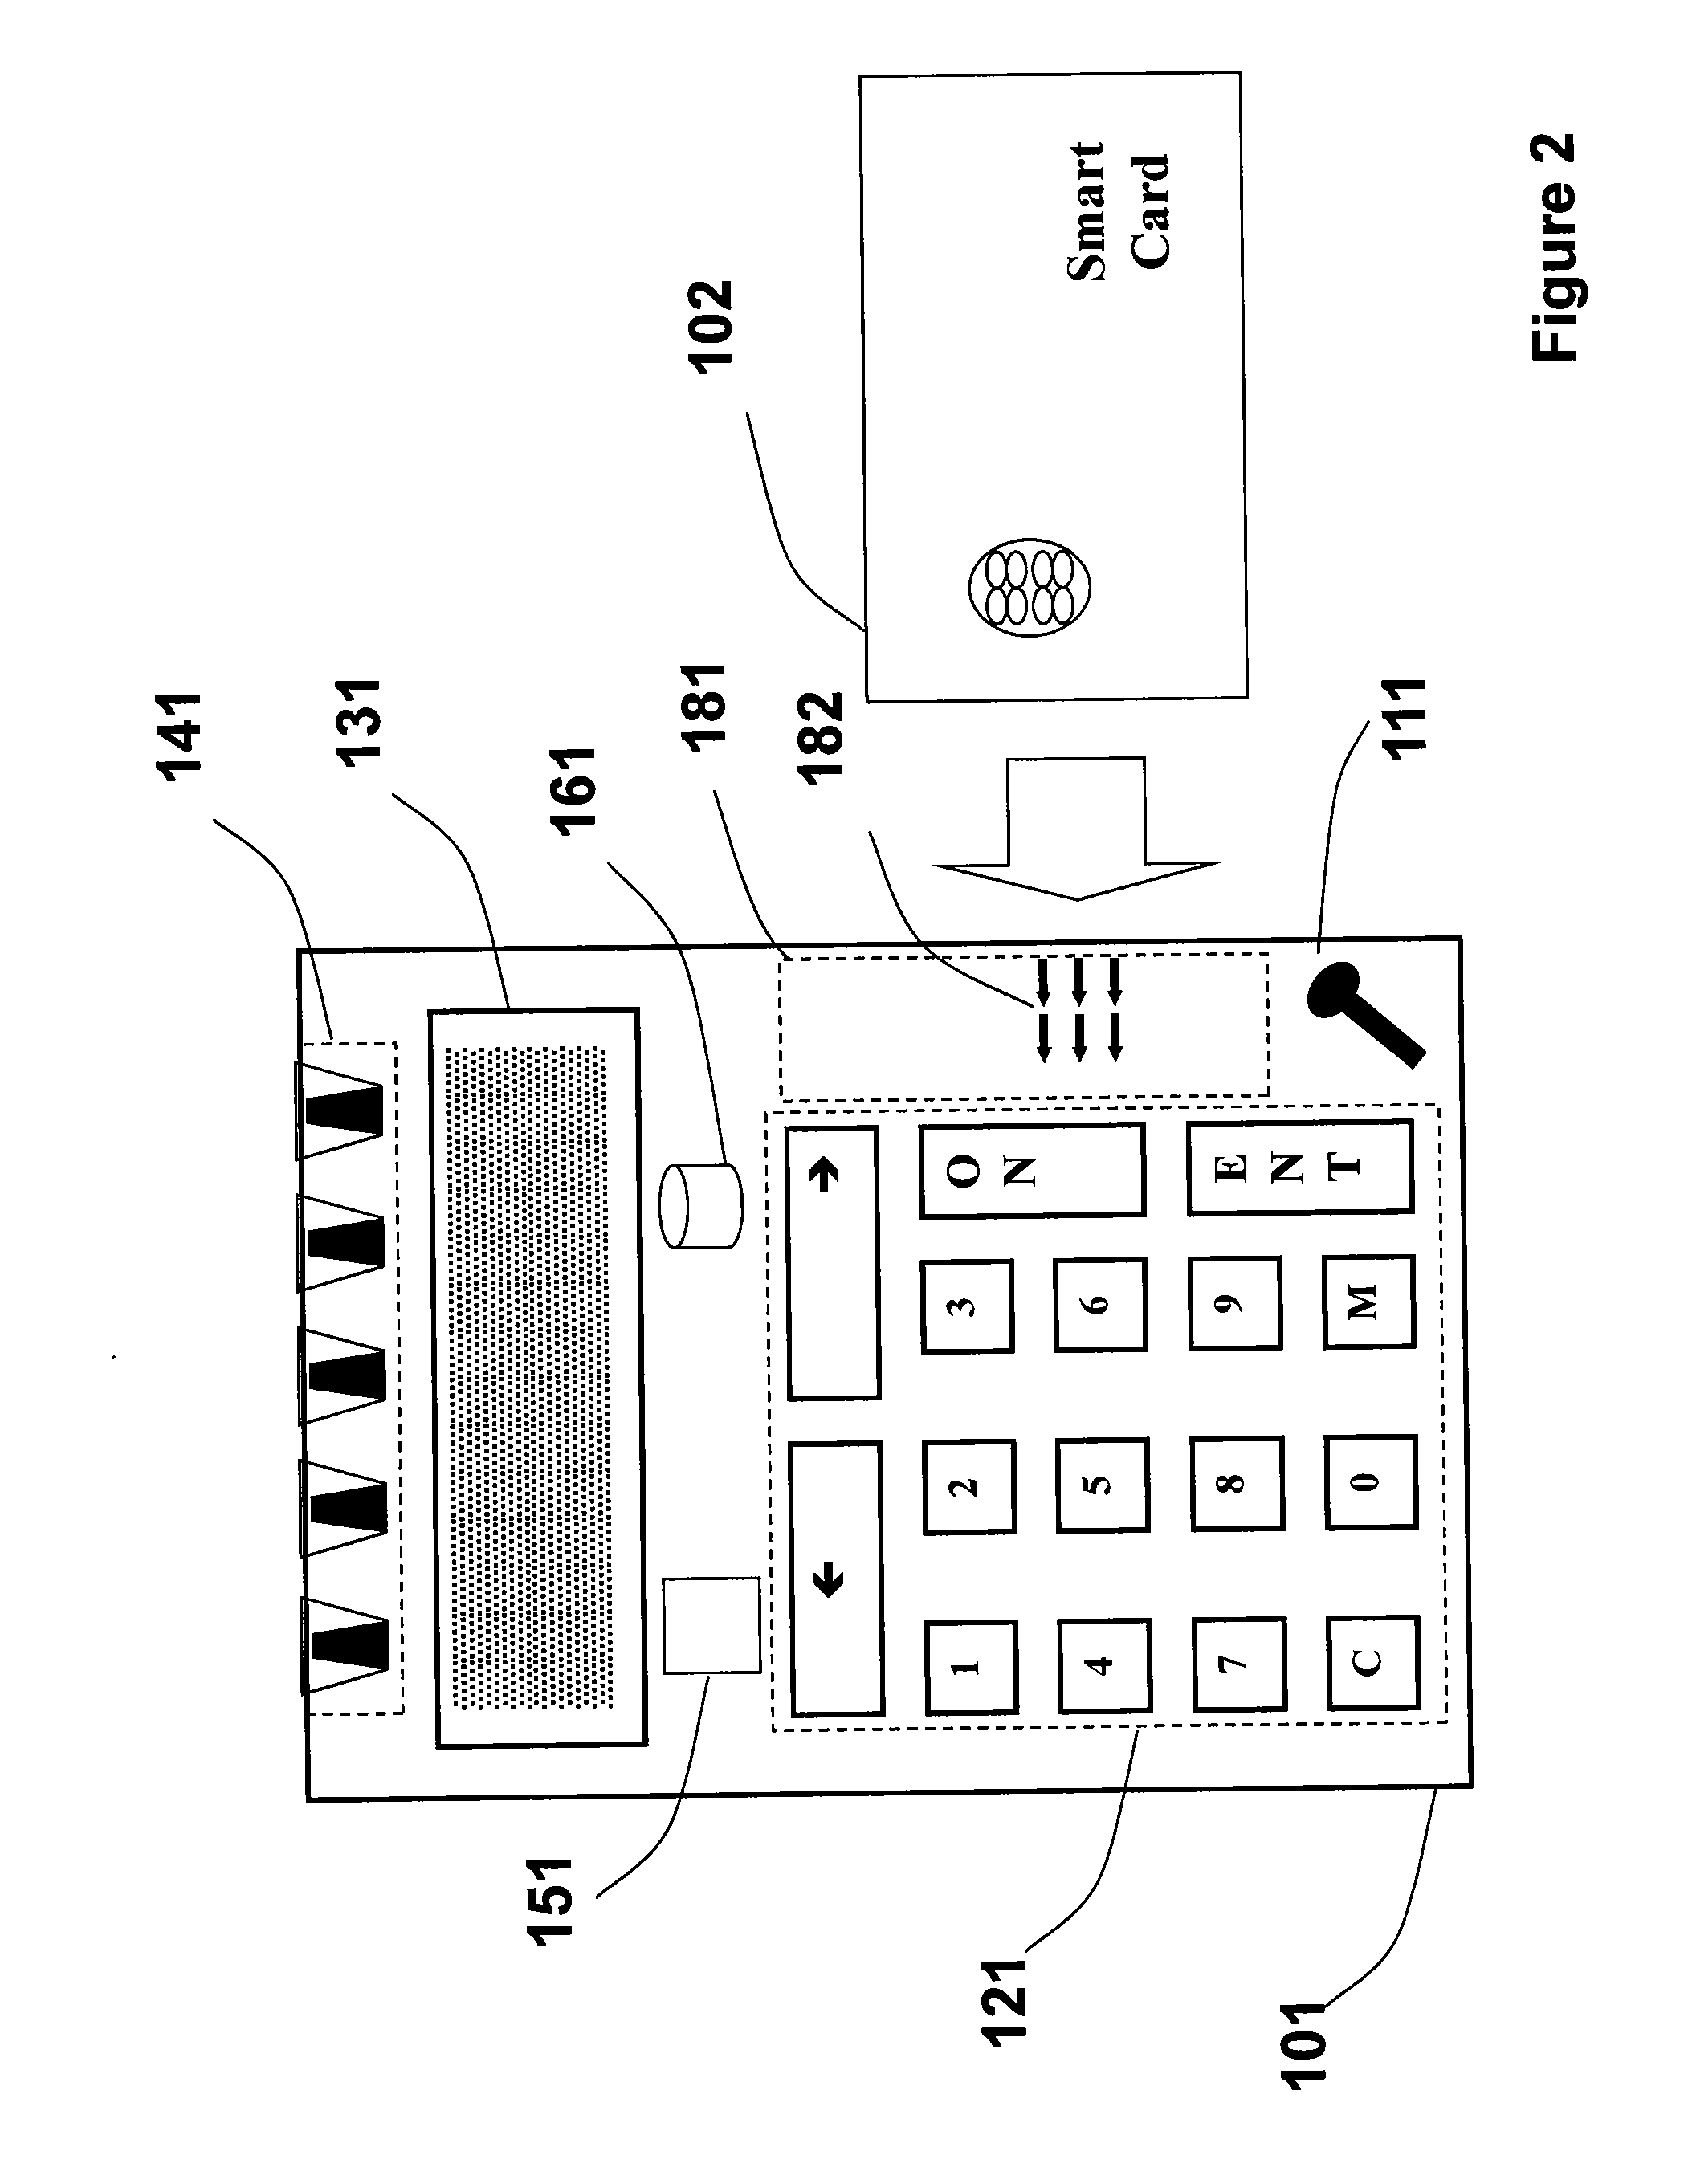 Strong authentication token with acoustic data input